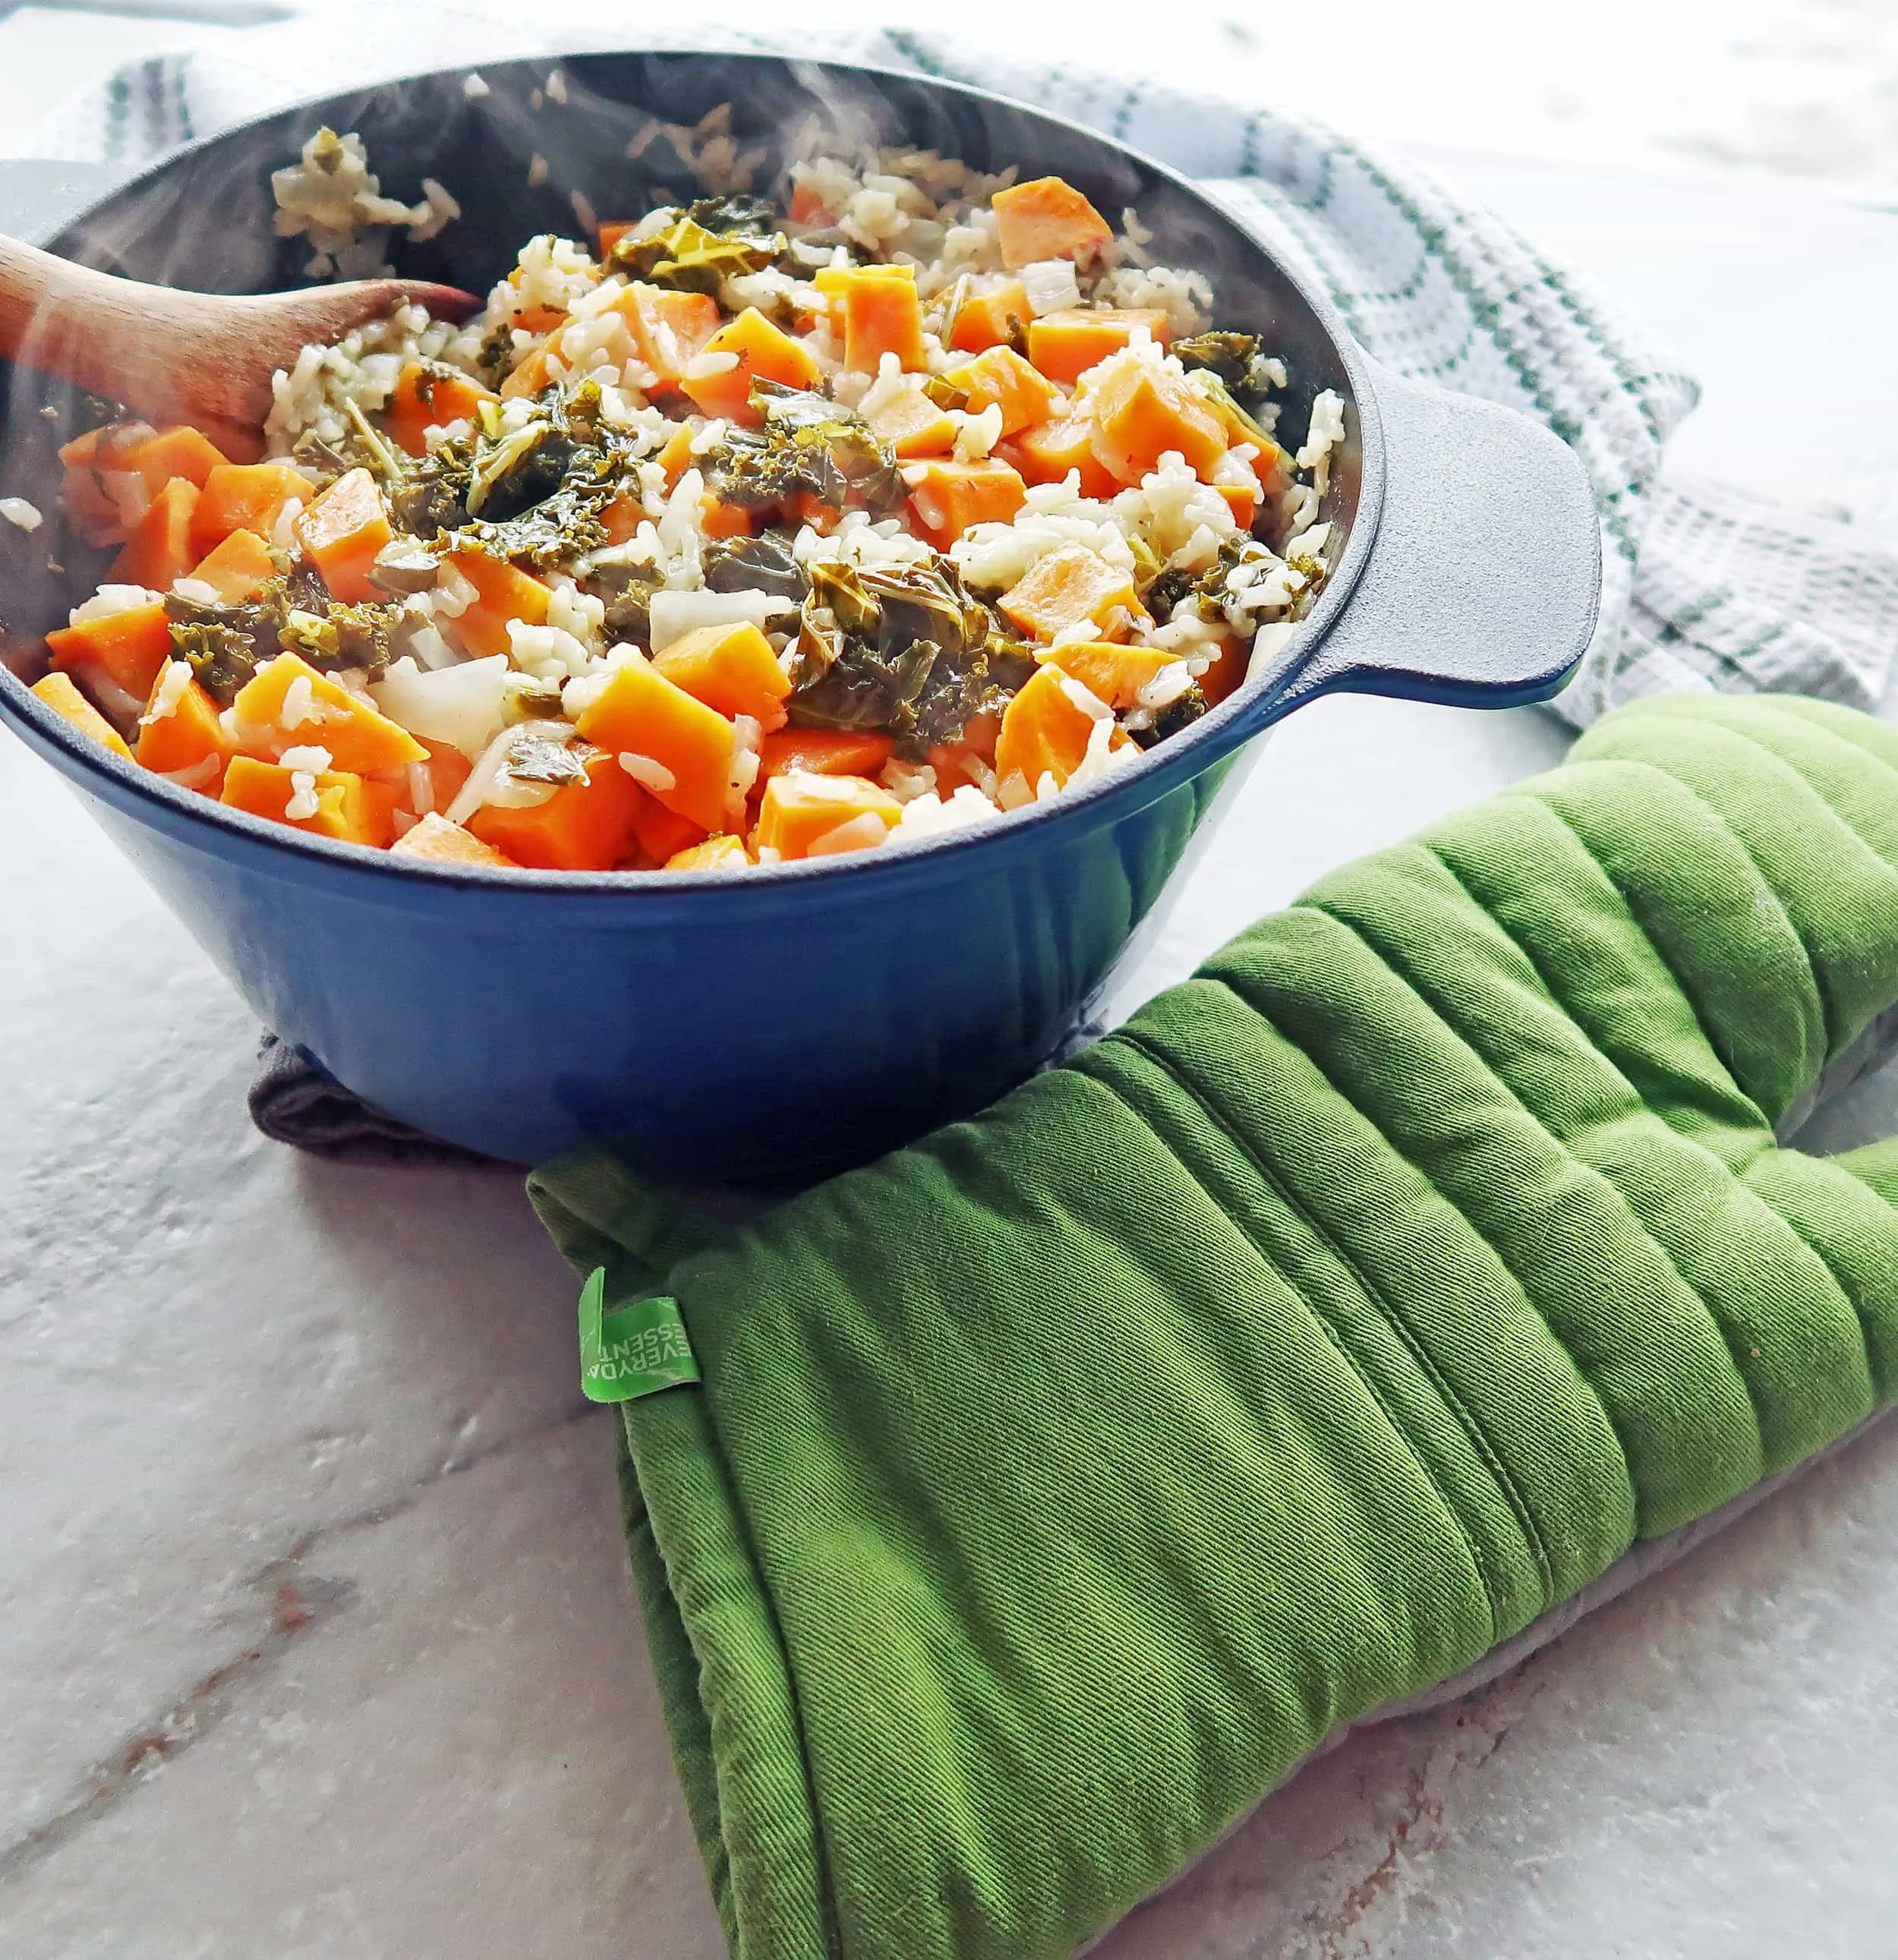 A Dutch oven full of vegetarian, gluten-free sweet potato and kale risotto with green oven mitt to its side.